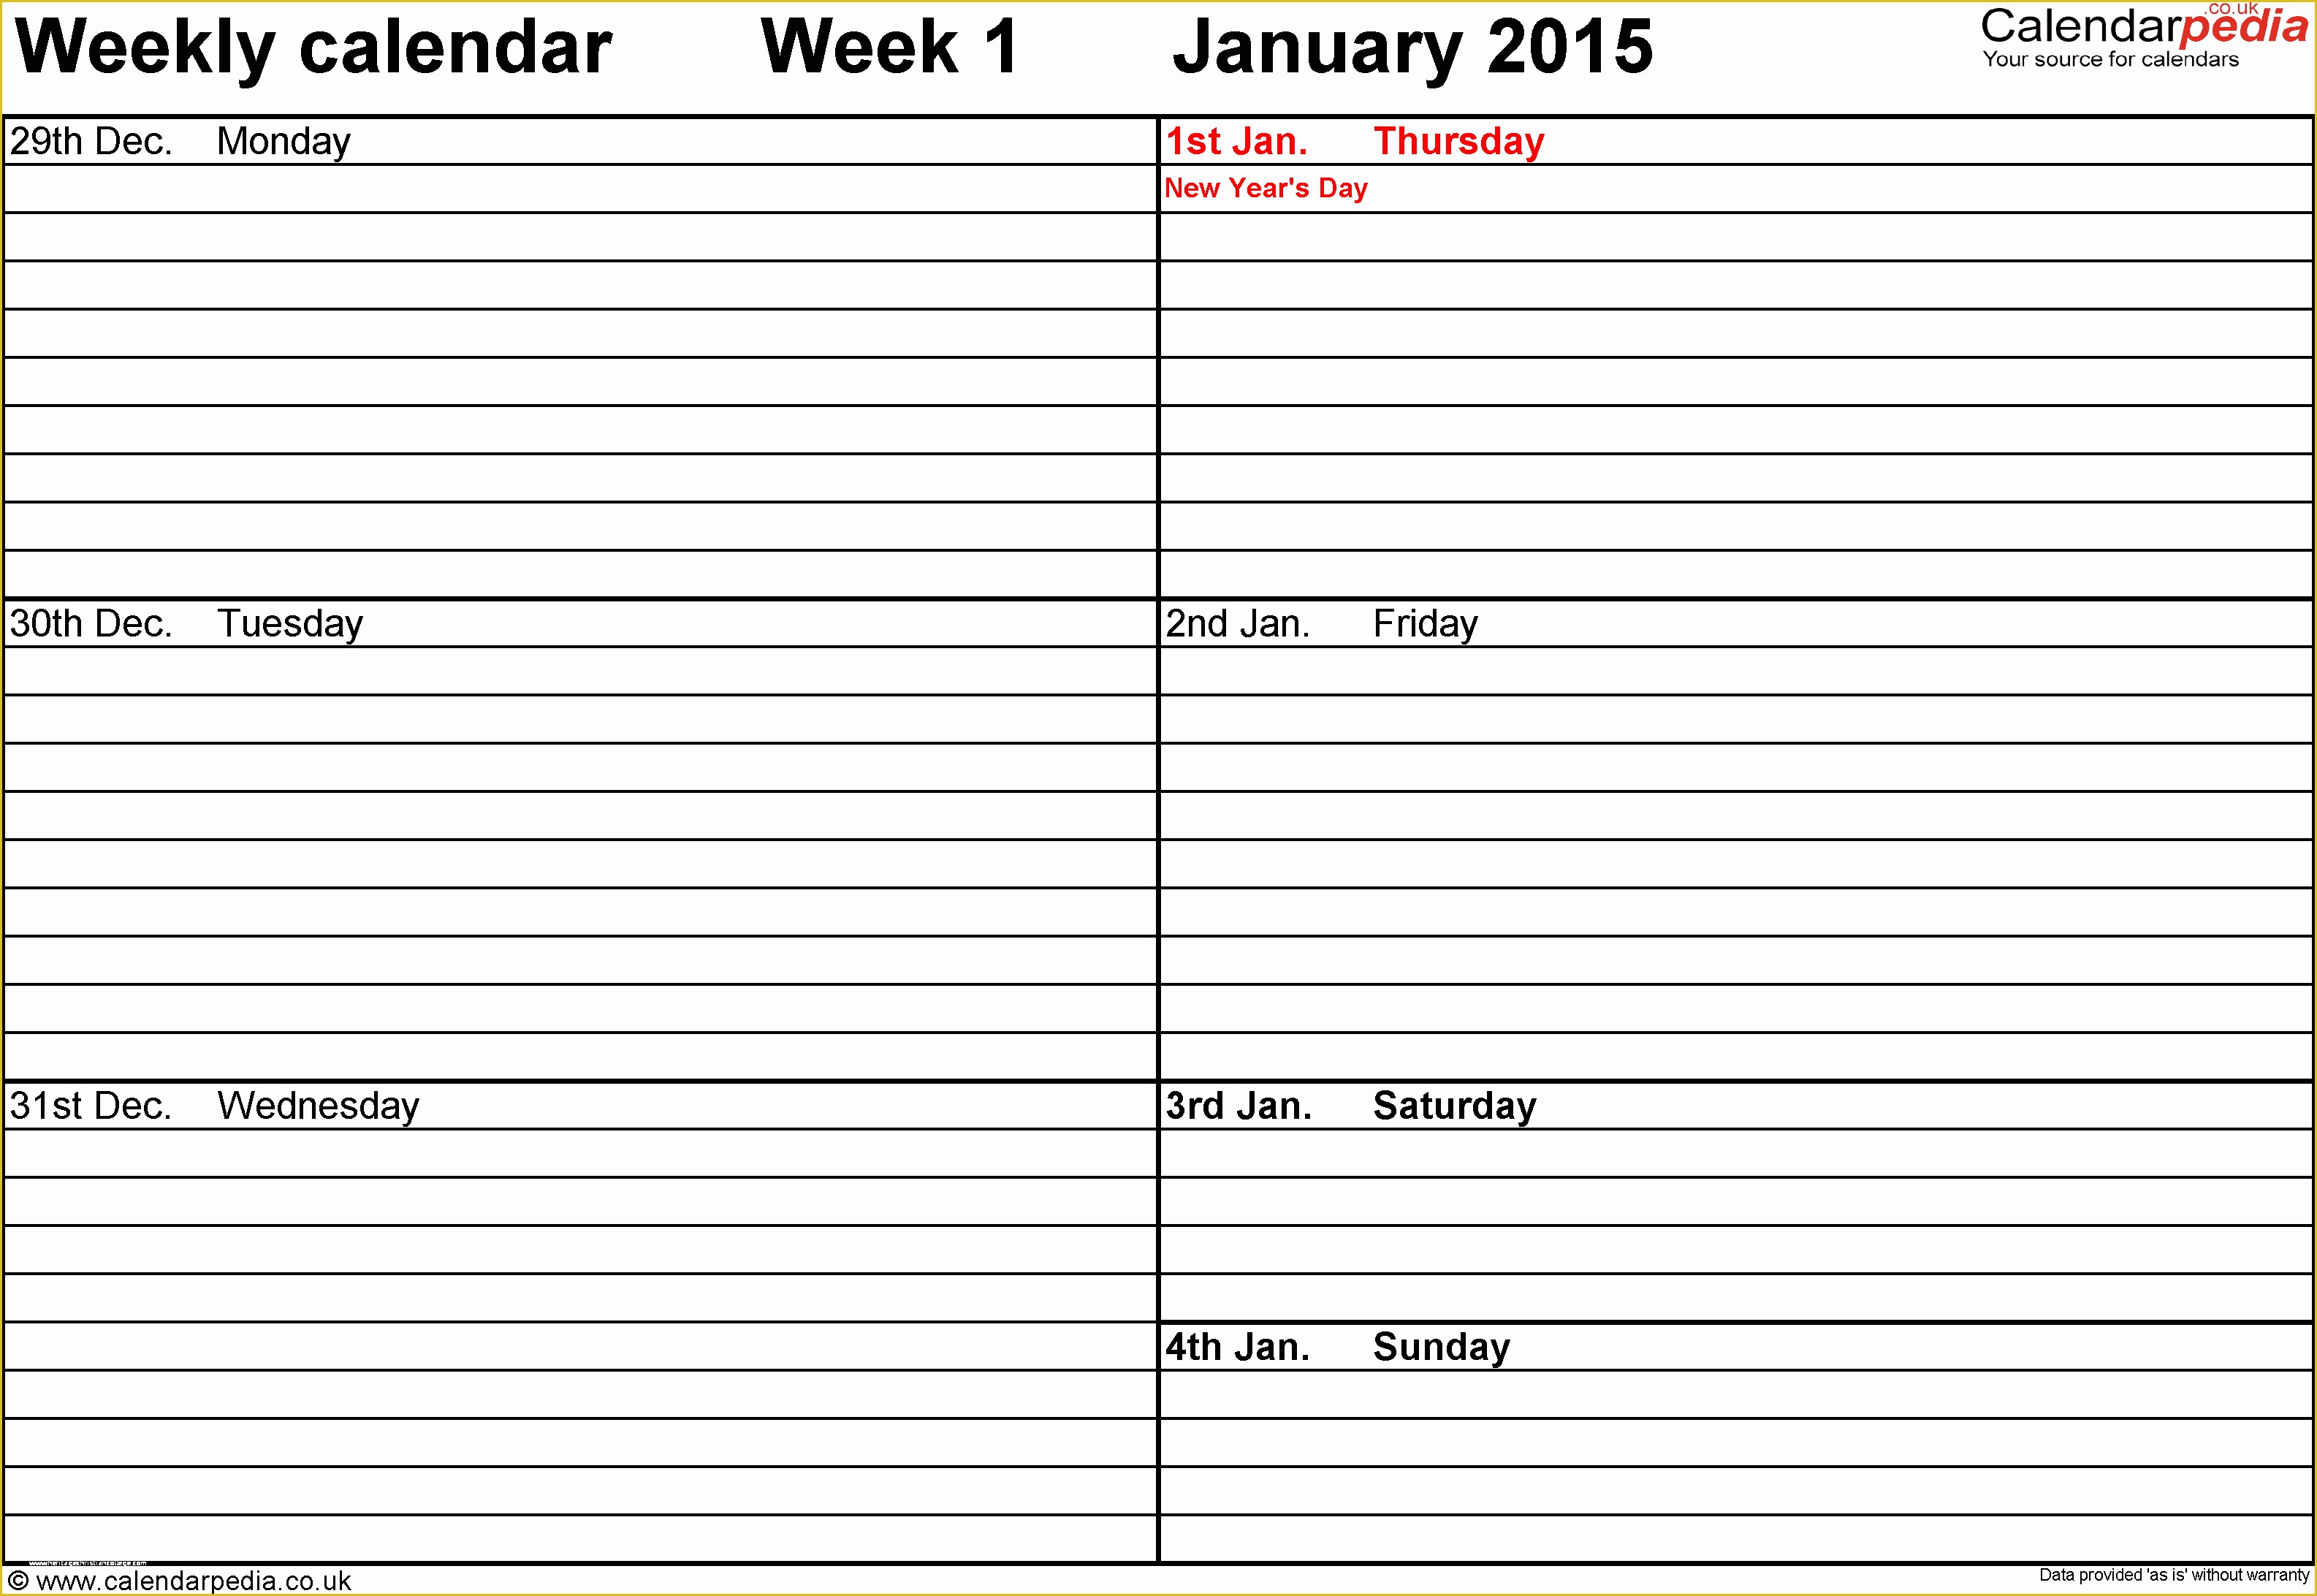 Free Weekly Appointment Calendar Template Of Weekly Calendar Pdf